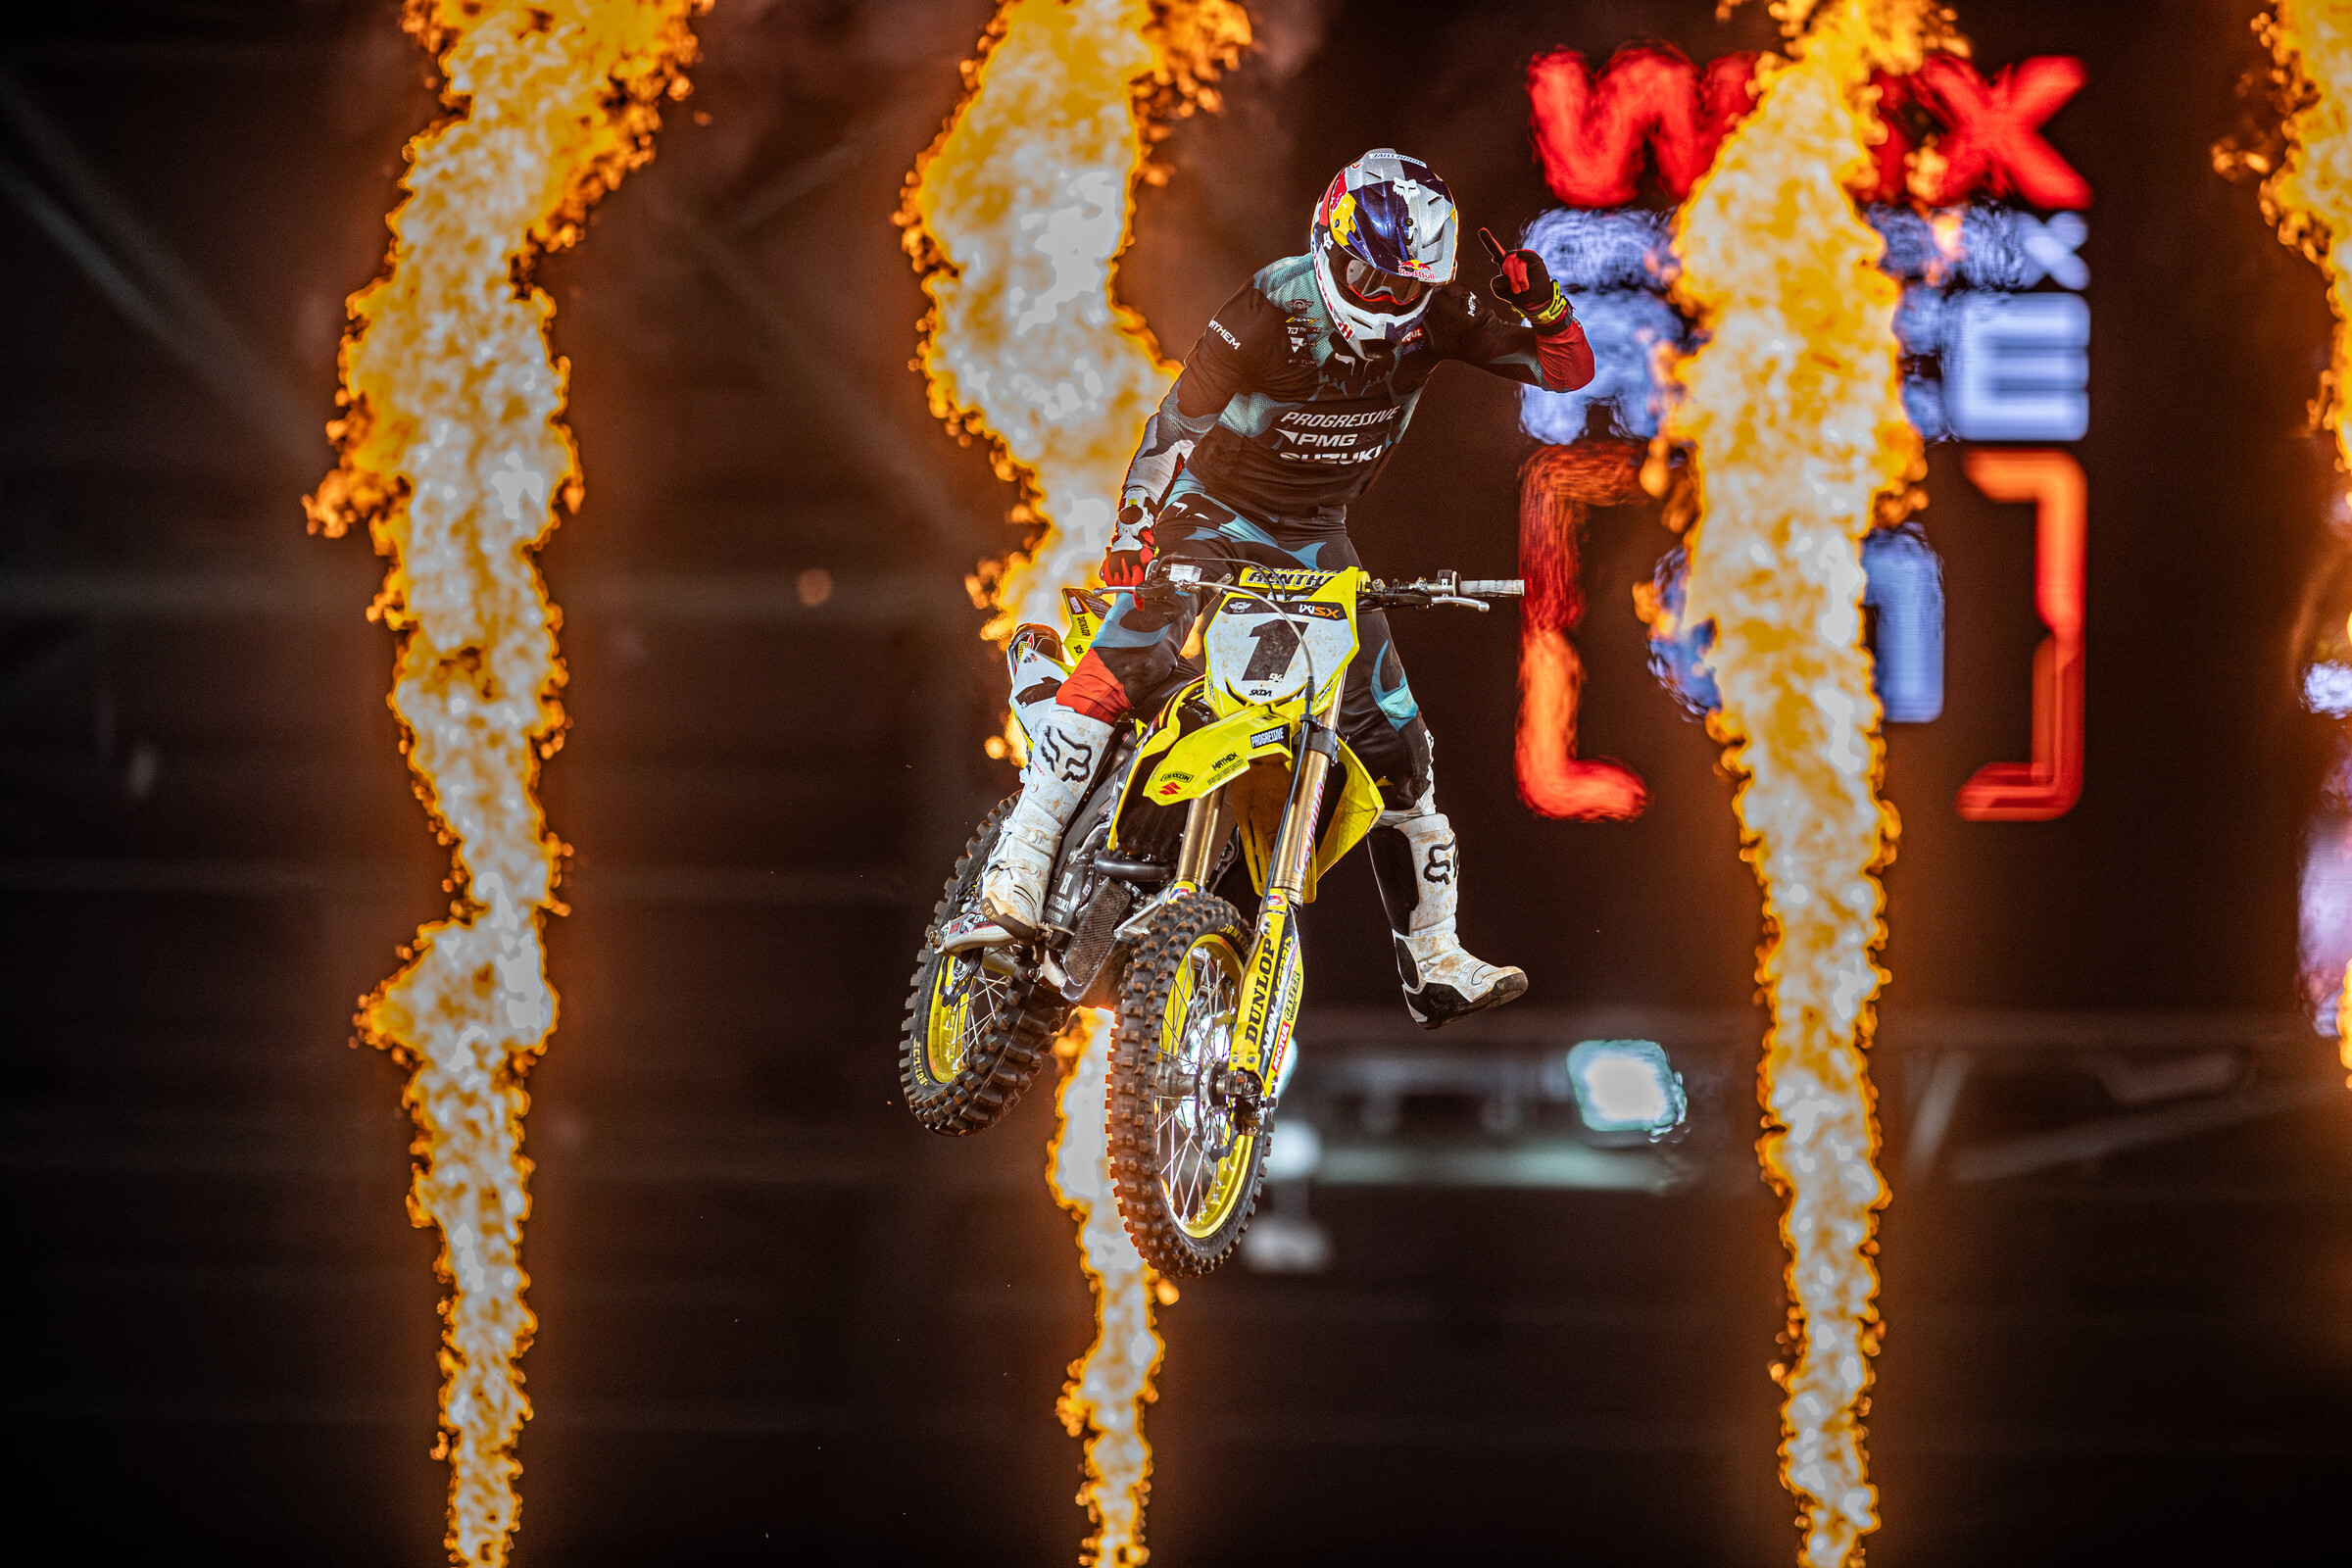  Roczen arrived into the race driving Joey Savatgy on factors, but each and every of the 3 primary gatherings shell out towards the championship. He was the most effective in Australia's 3 races to get the factors direct back and gain the title.